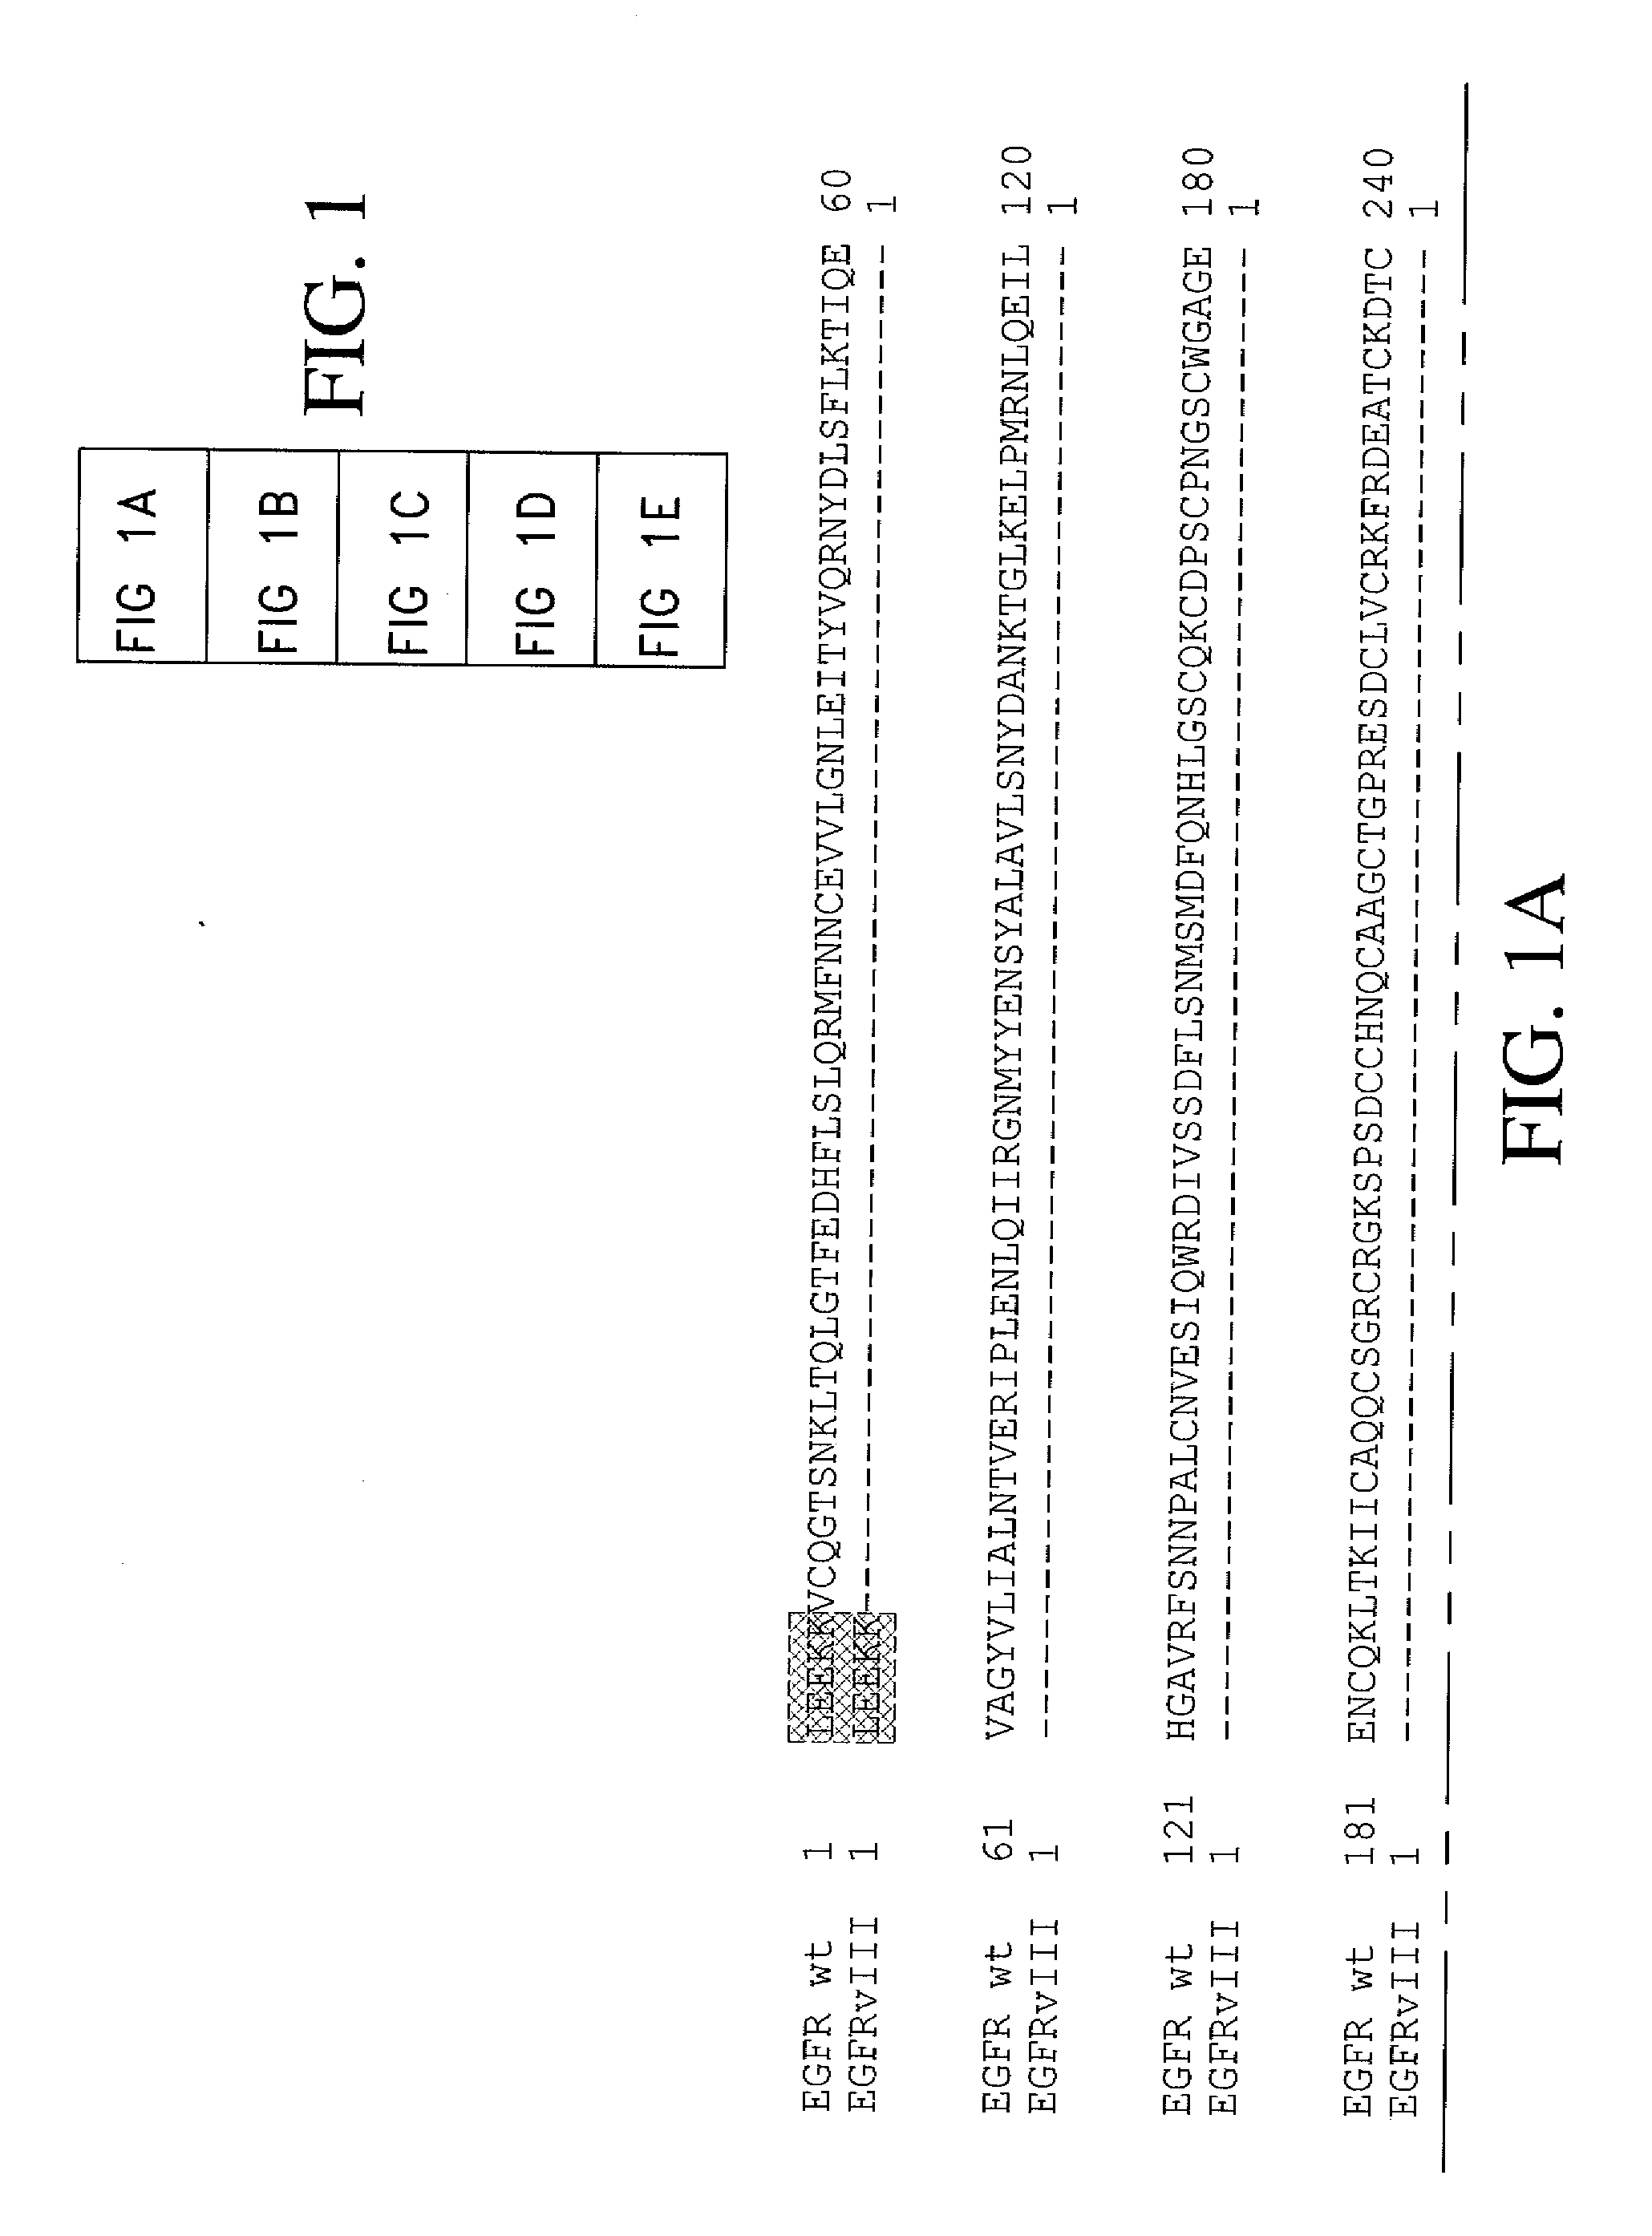 Antibodies directed to the deletion mutants of epidermal growth factor receptor and uses thereof